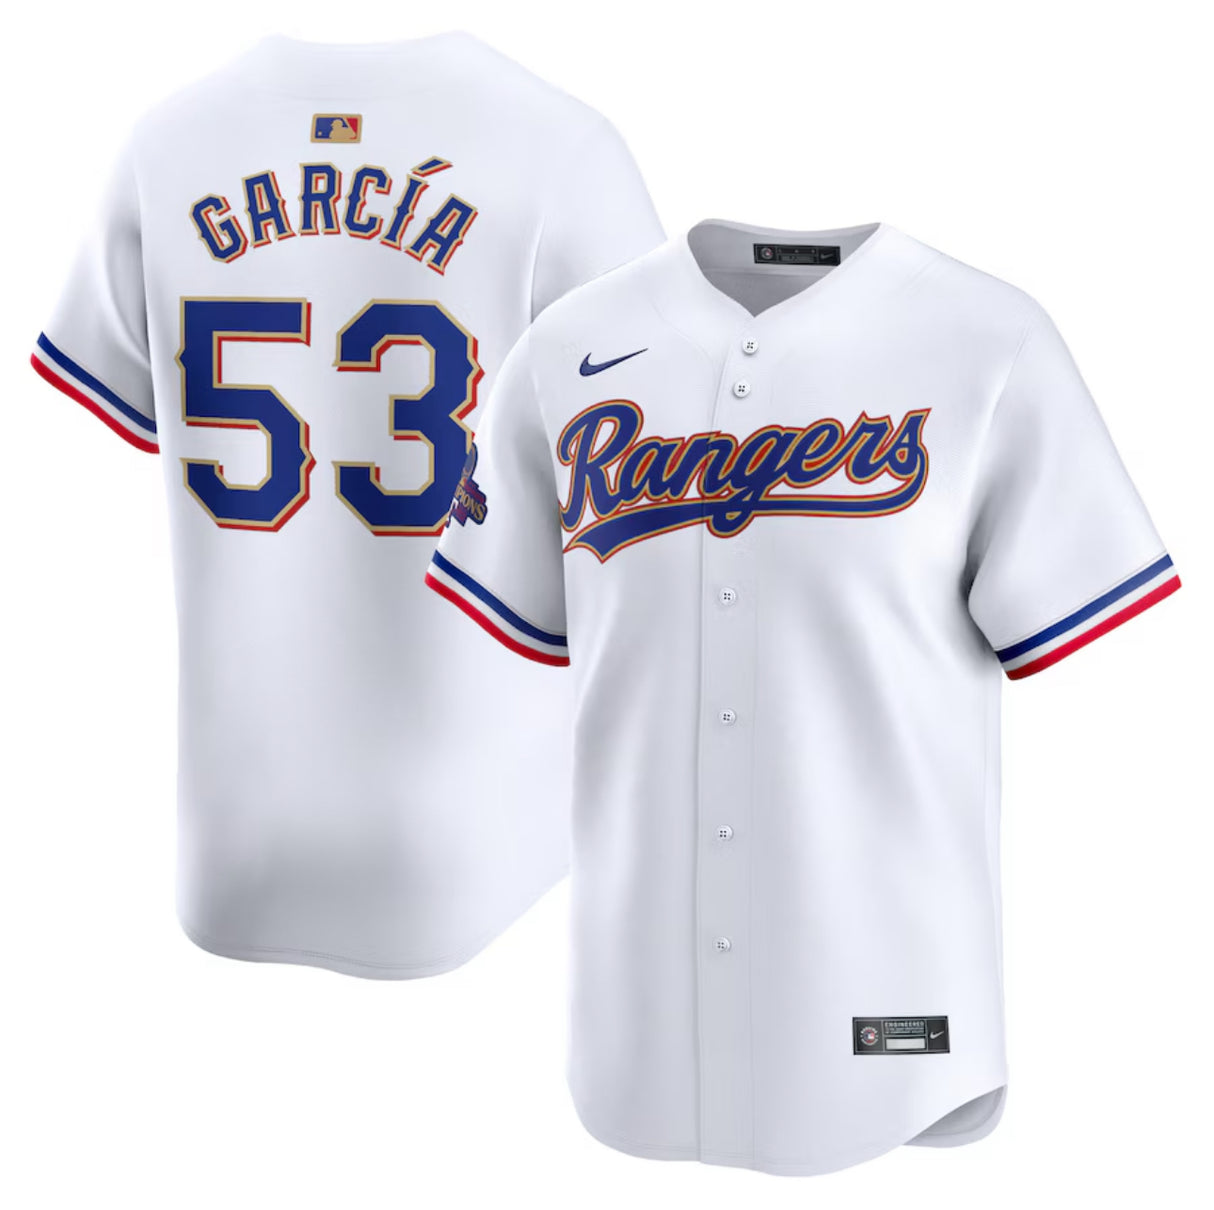 Adolis Garcia Texas Rangers Gold Edition Jerseys - Jersey and Sneakers